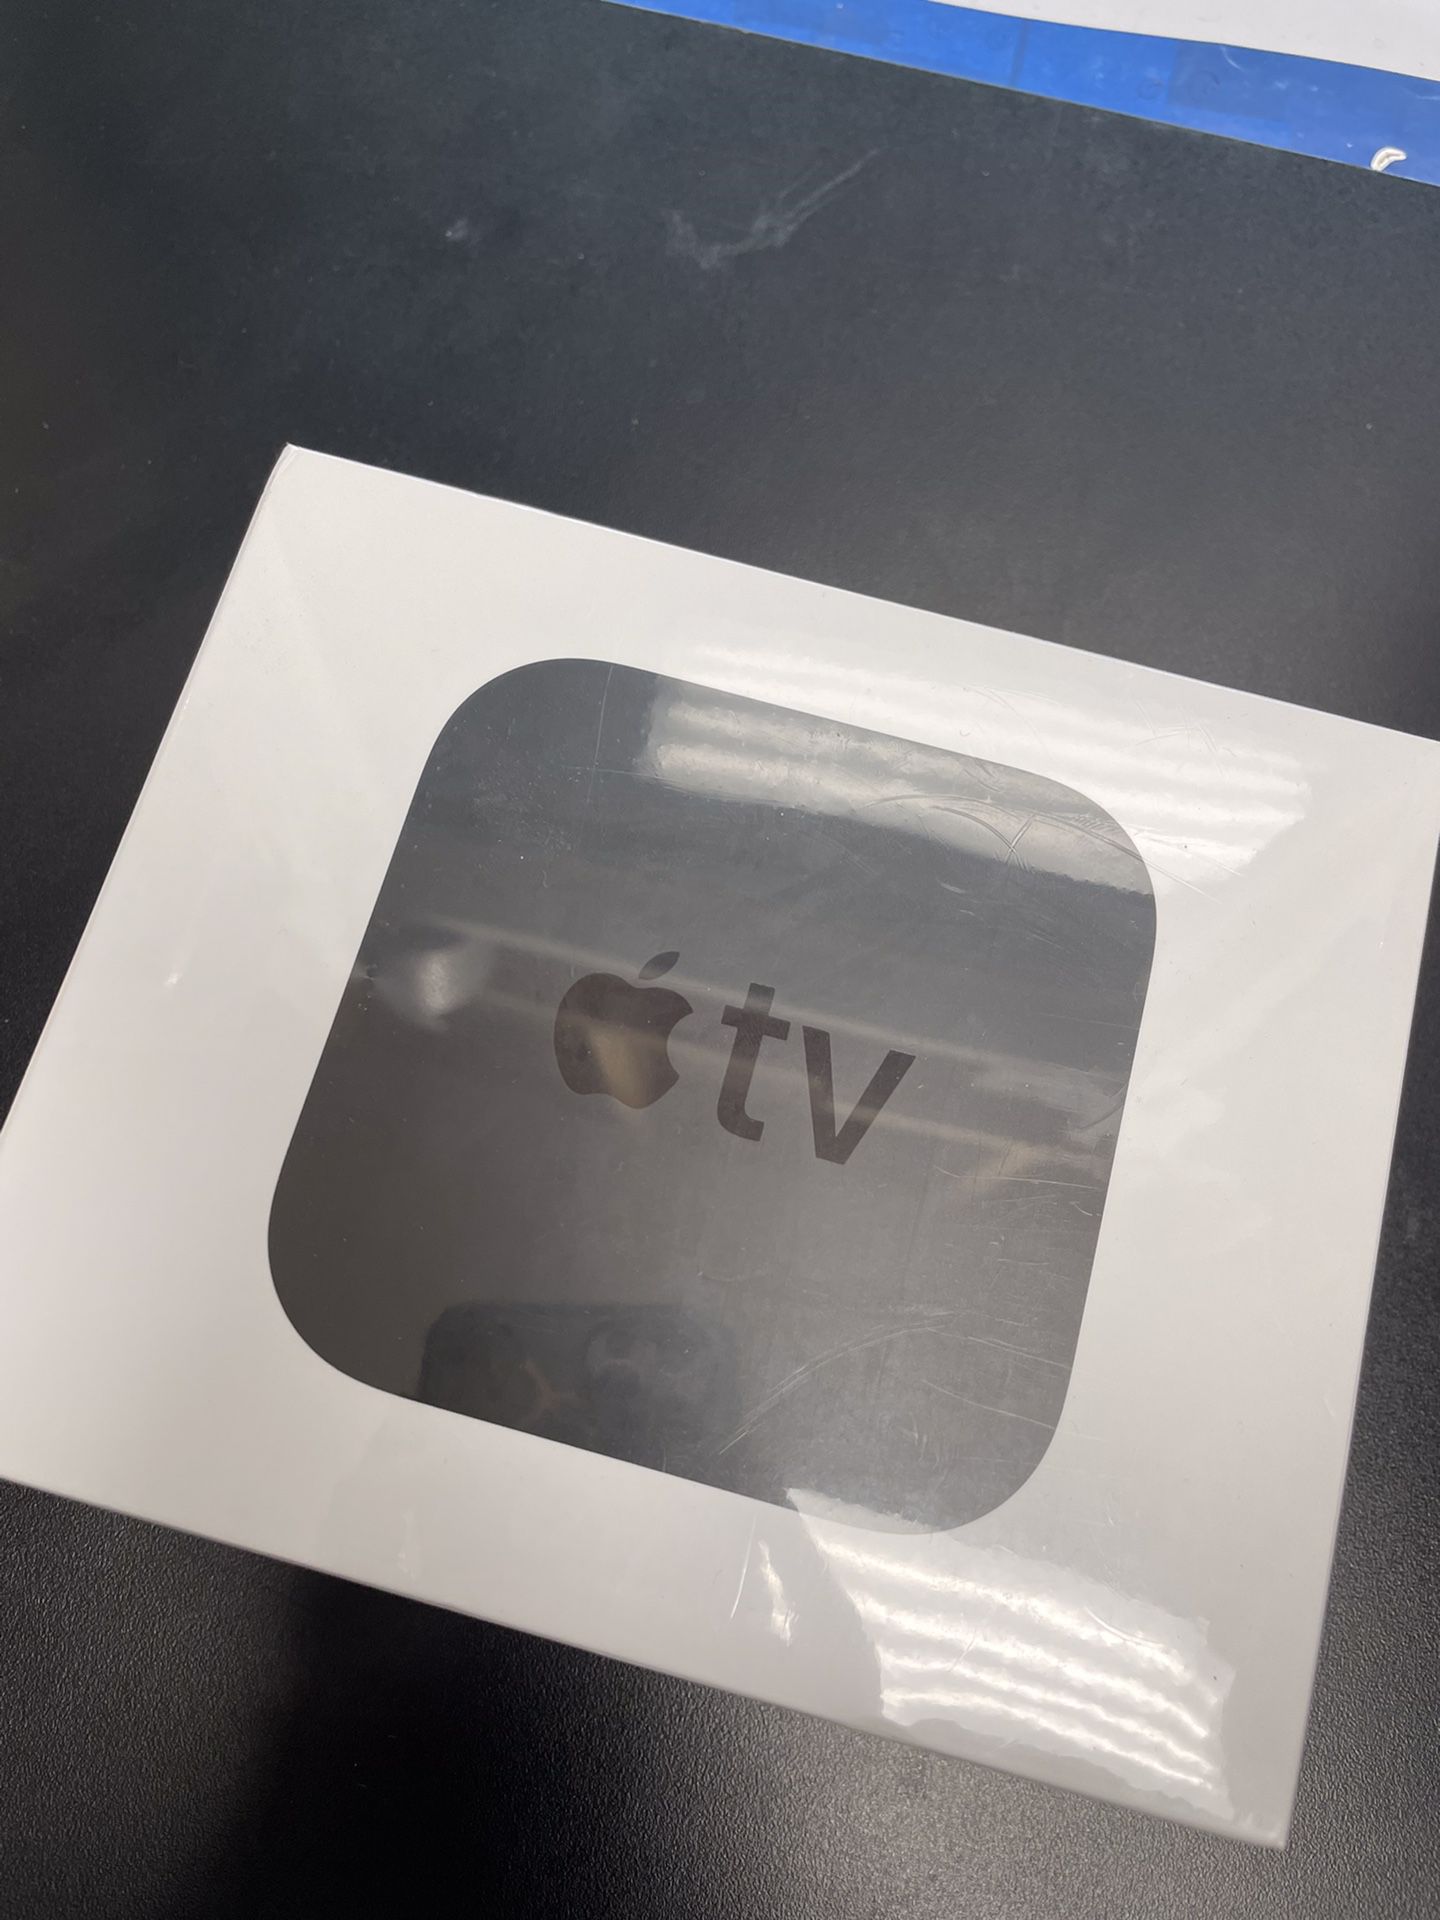 APPLE TV BRAND NEW IN A BOX